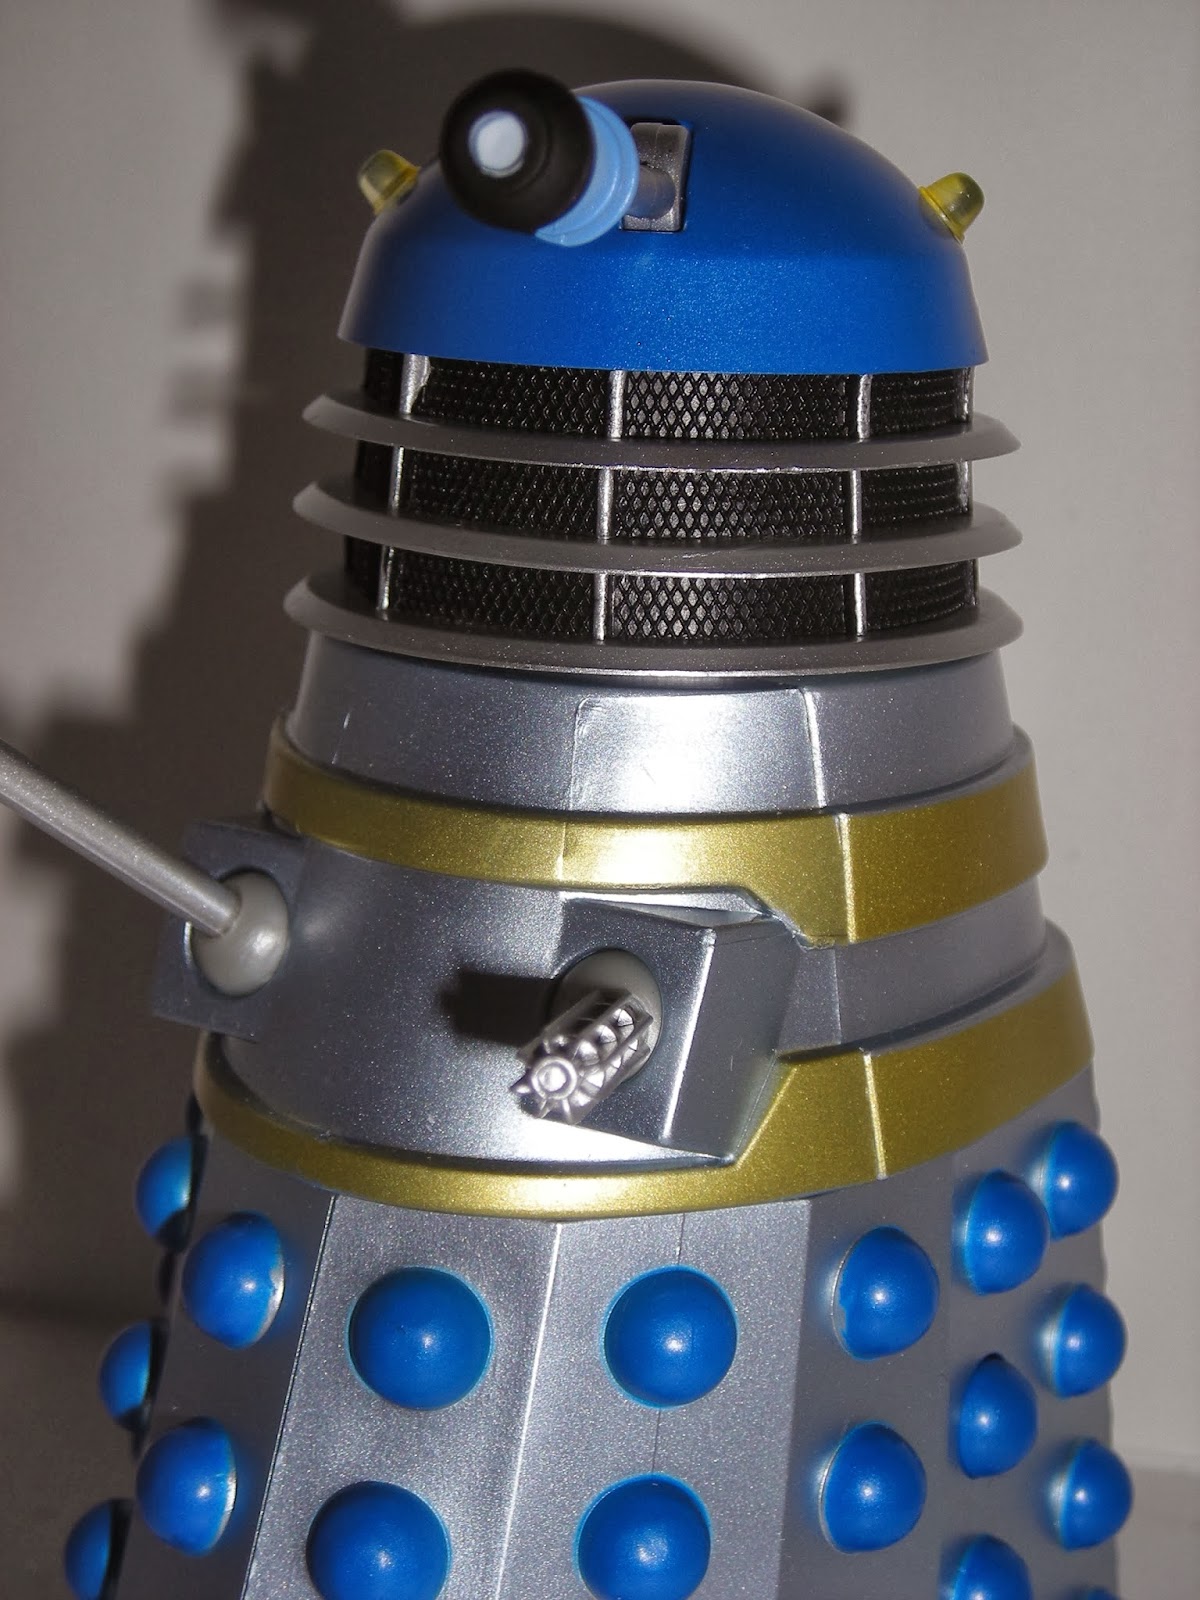 Daleks conquer and destroy!